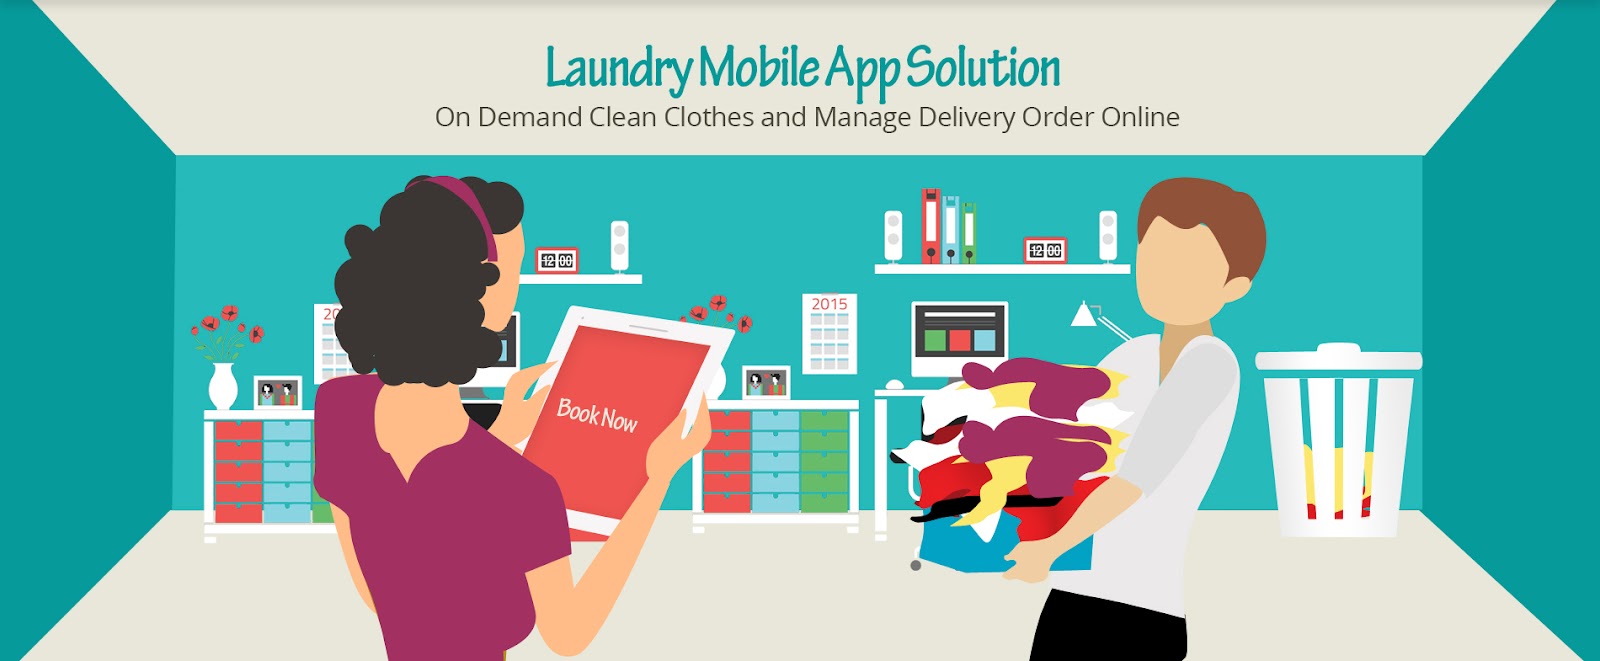 On Demand Laundry Management System For Sale